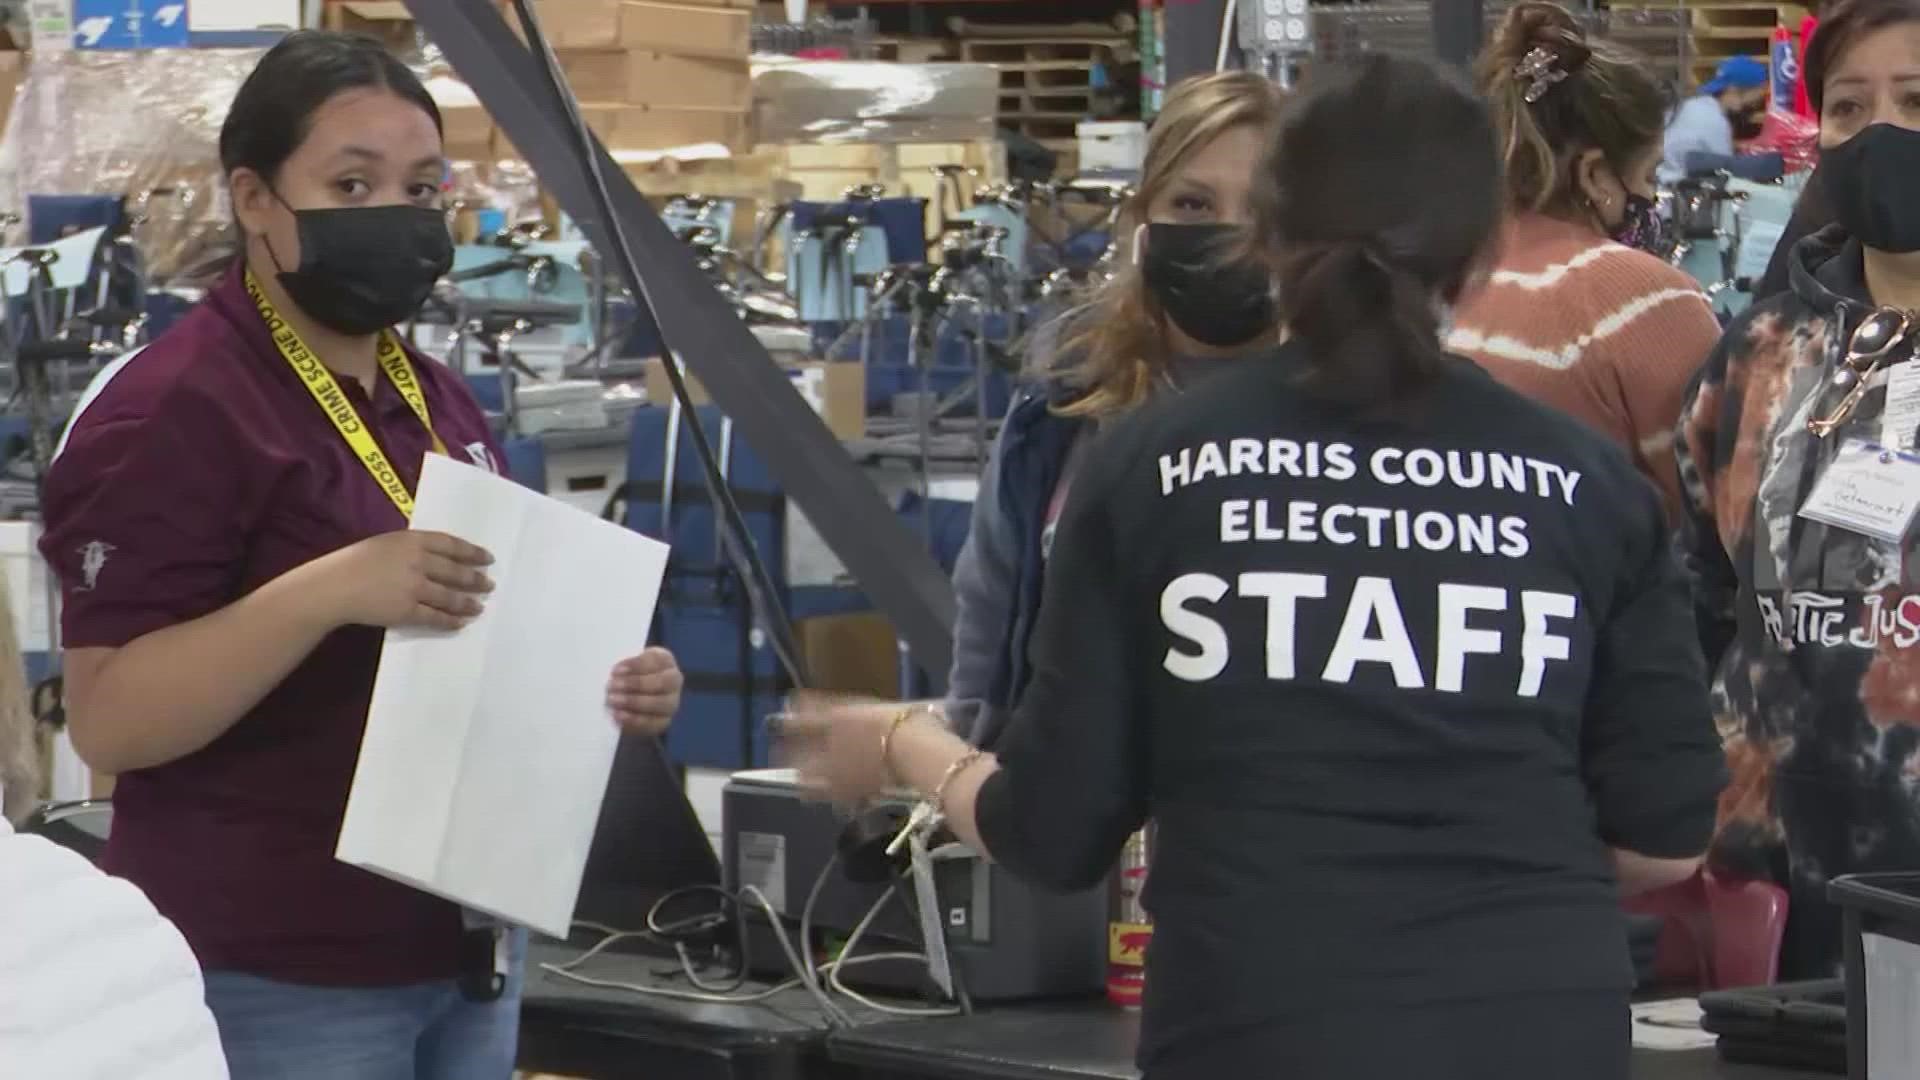 The 2022 midterm season begins Tuesday as Texas voters head to the polls for the state’s primary, the first in the nation this year.